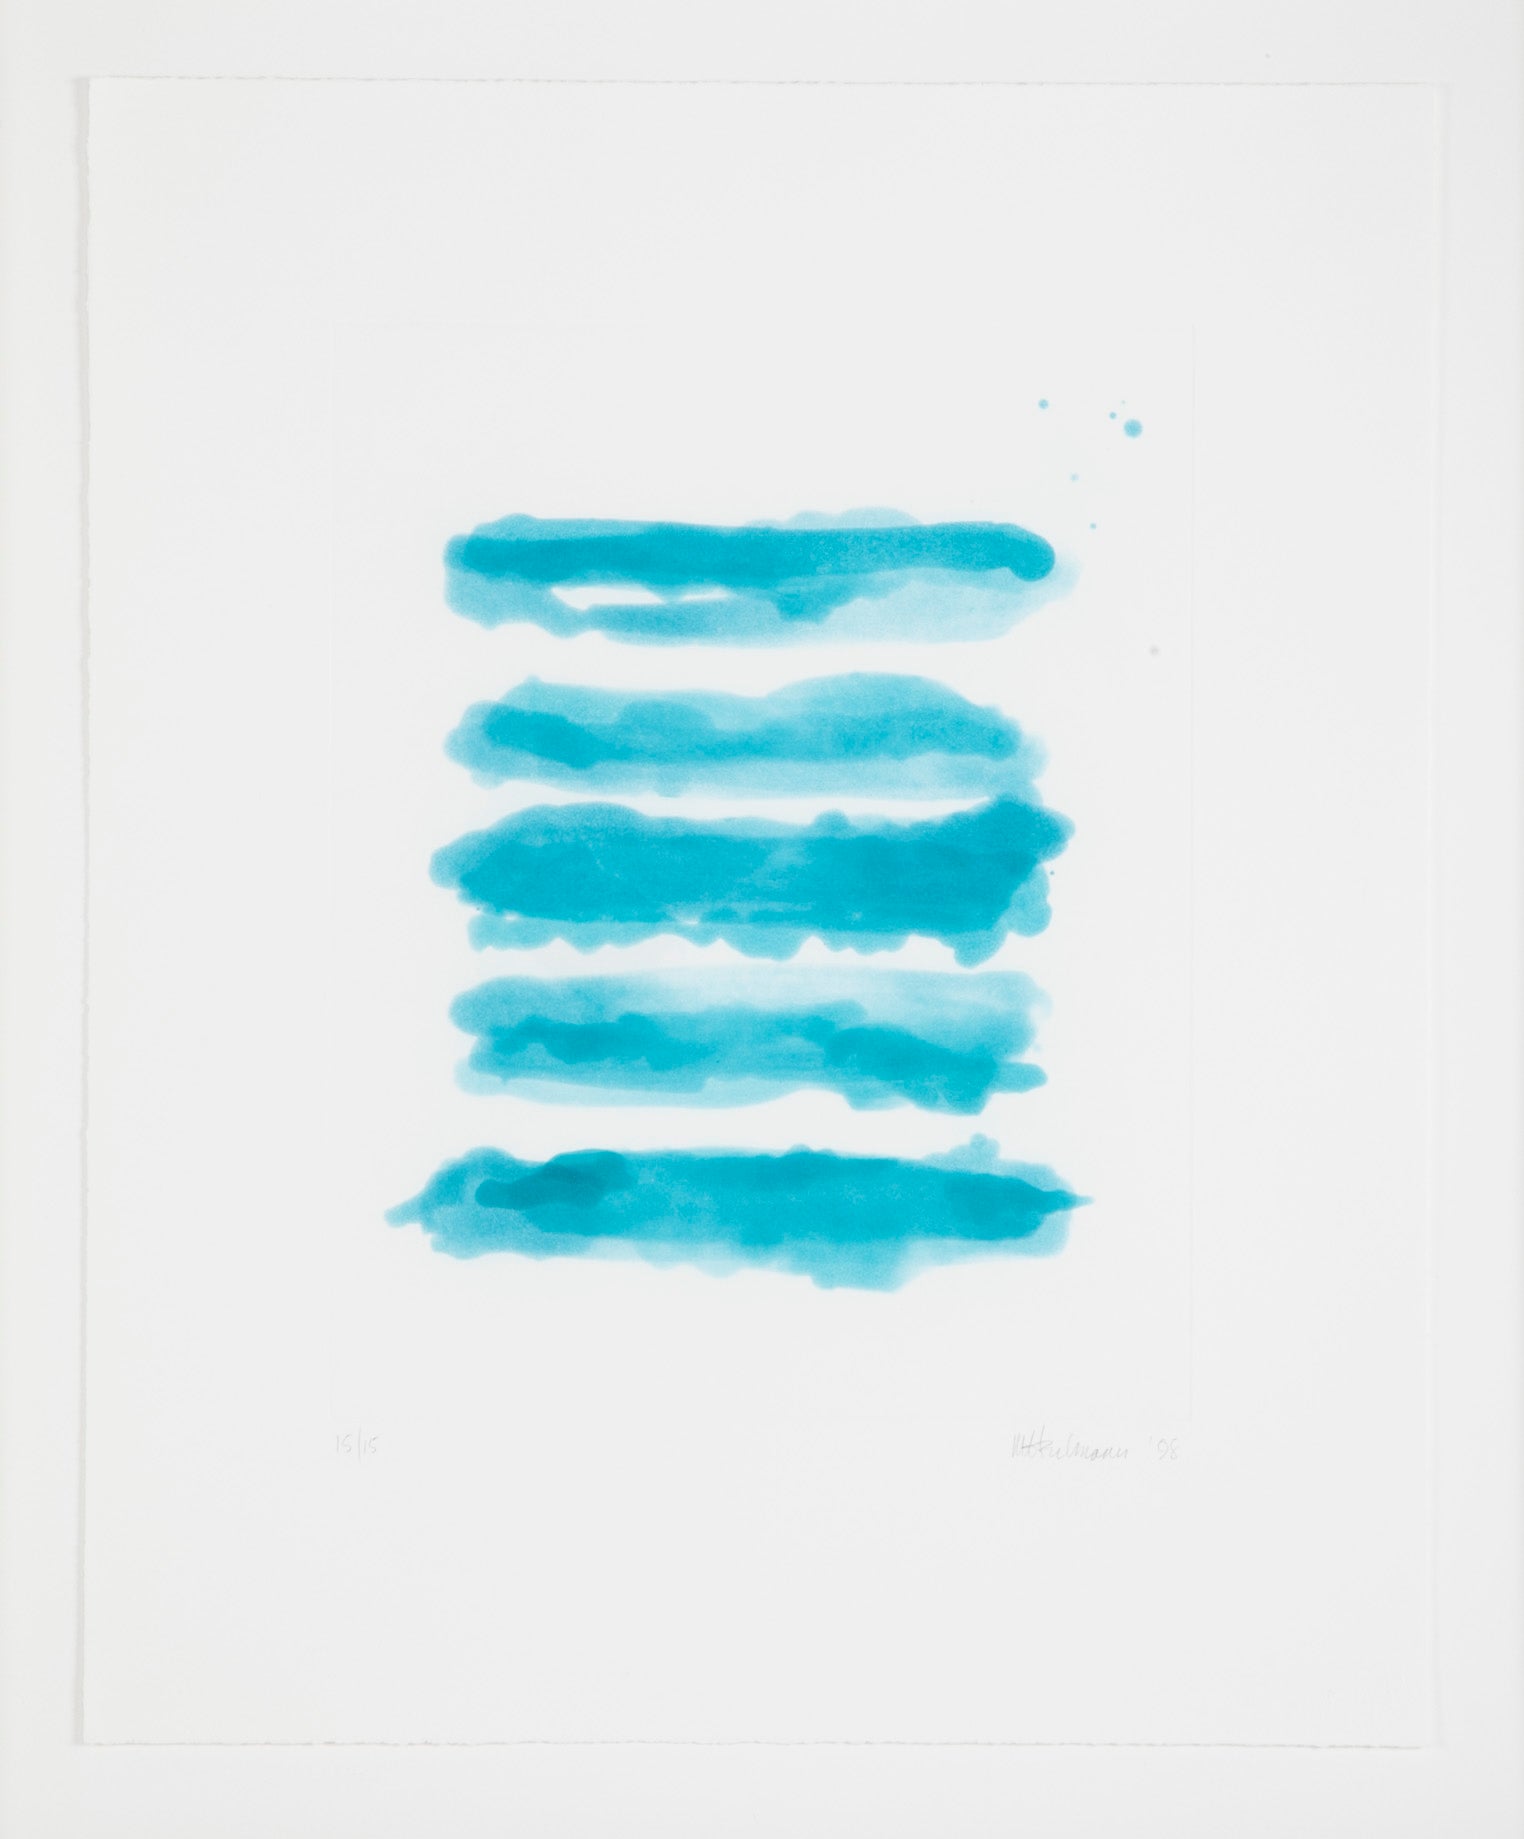 "Ocean" Aquatint in Colors on Wove Paper by Mary Heilmann